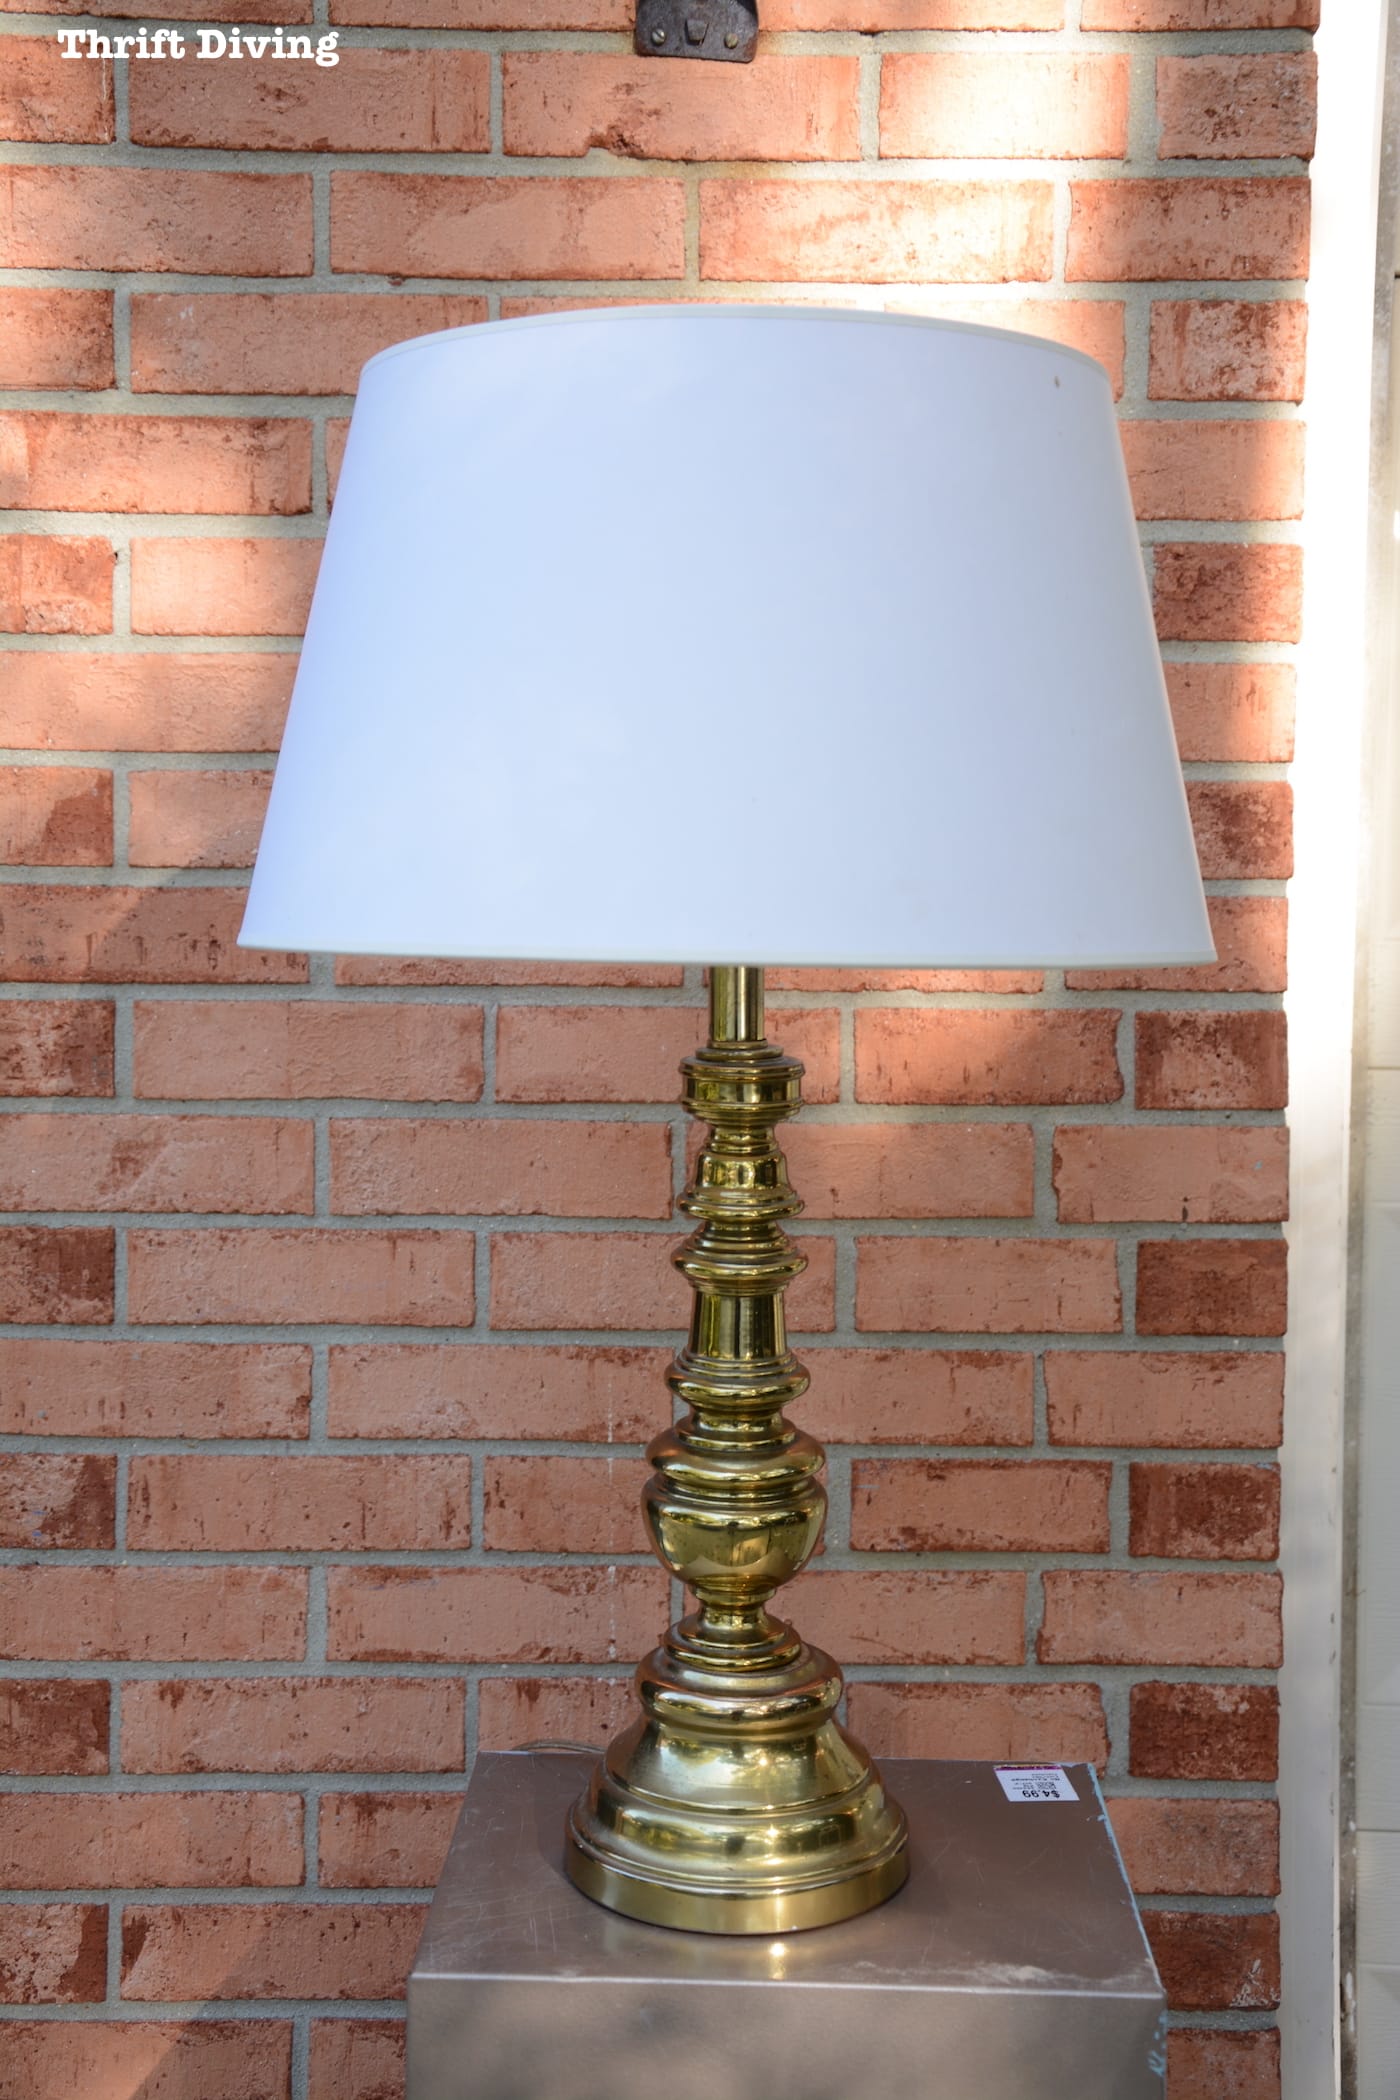 Thrifted End Table and Lamp Makeover - Brassy lamp - Thrift Diving